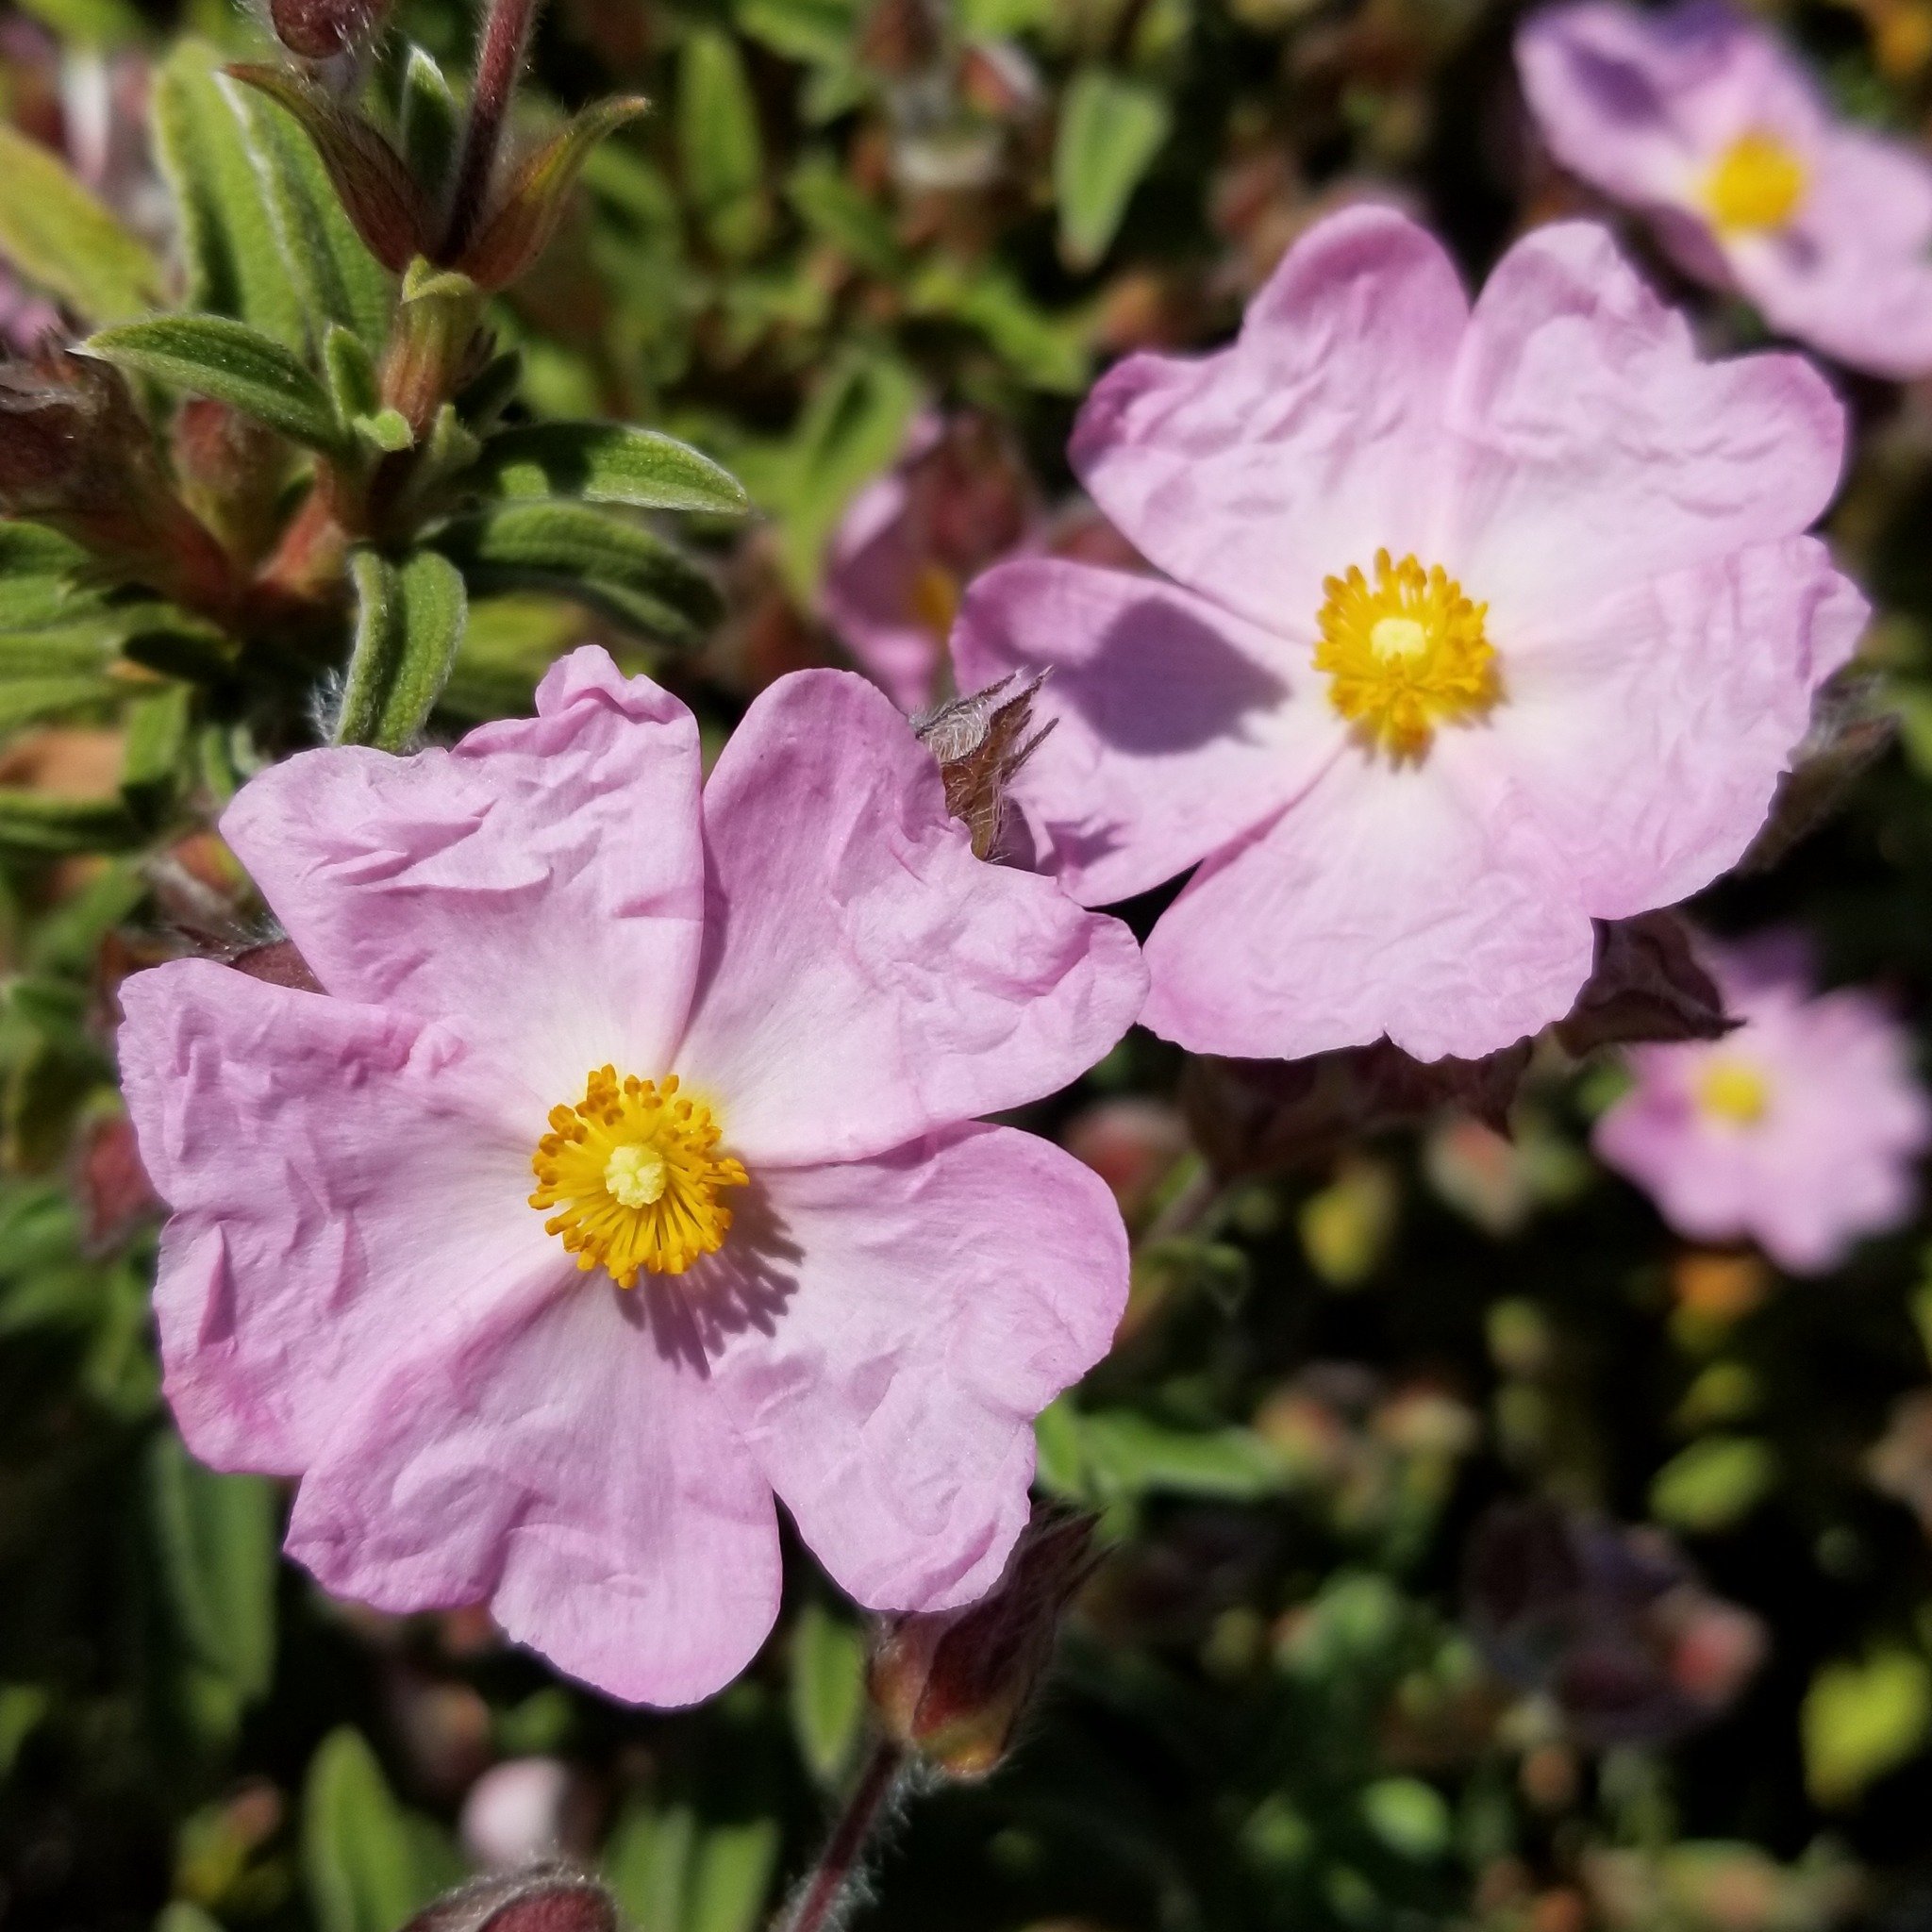 Happy Earth Month, plant lovers! 🌎 In honor of Mother Earth, we'll be talking this month about how to improve the sustainability and health of your garden.

In California's climate, drought-tolerant plants are a great place to start making your gard